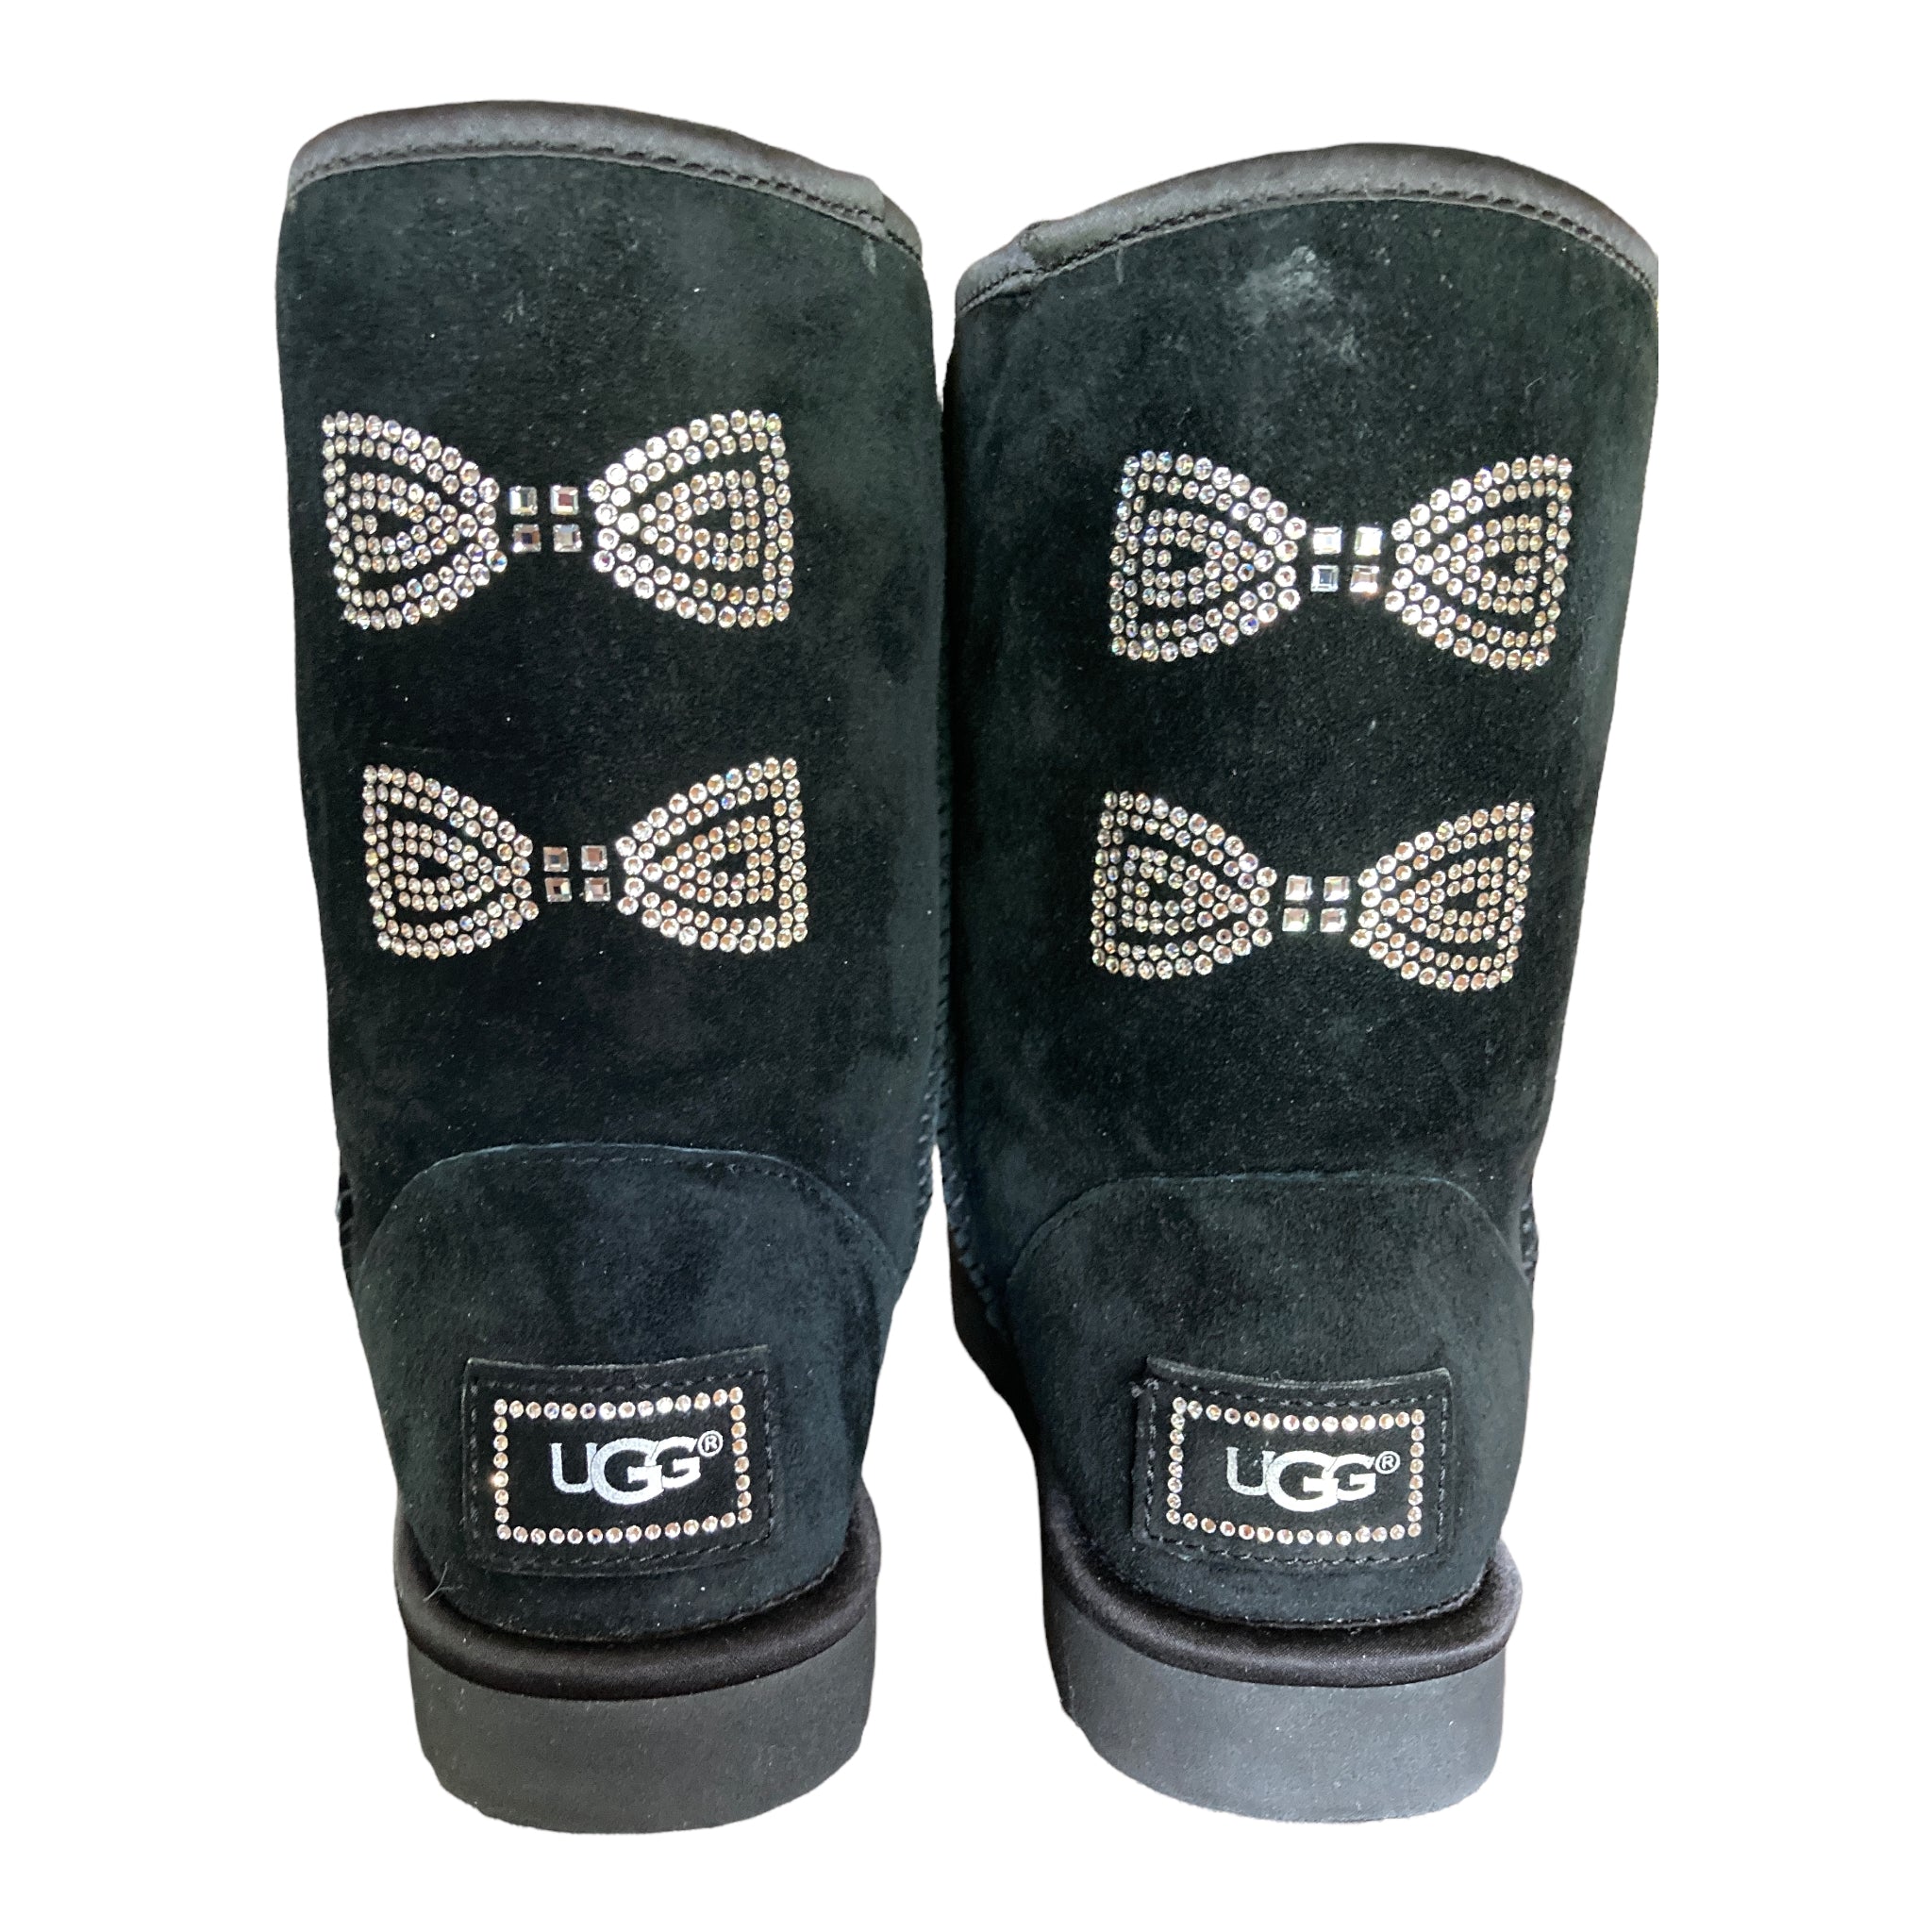 Uggs Black Bow Boots, 7